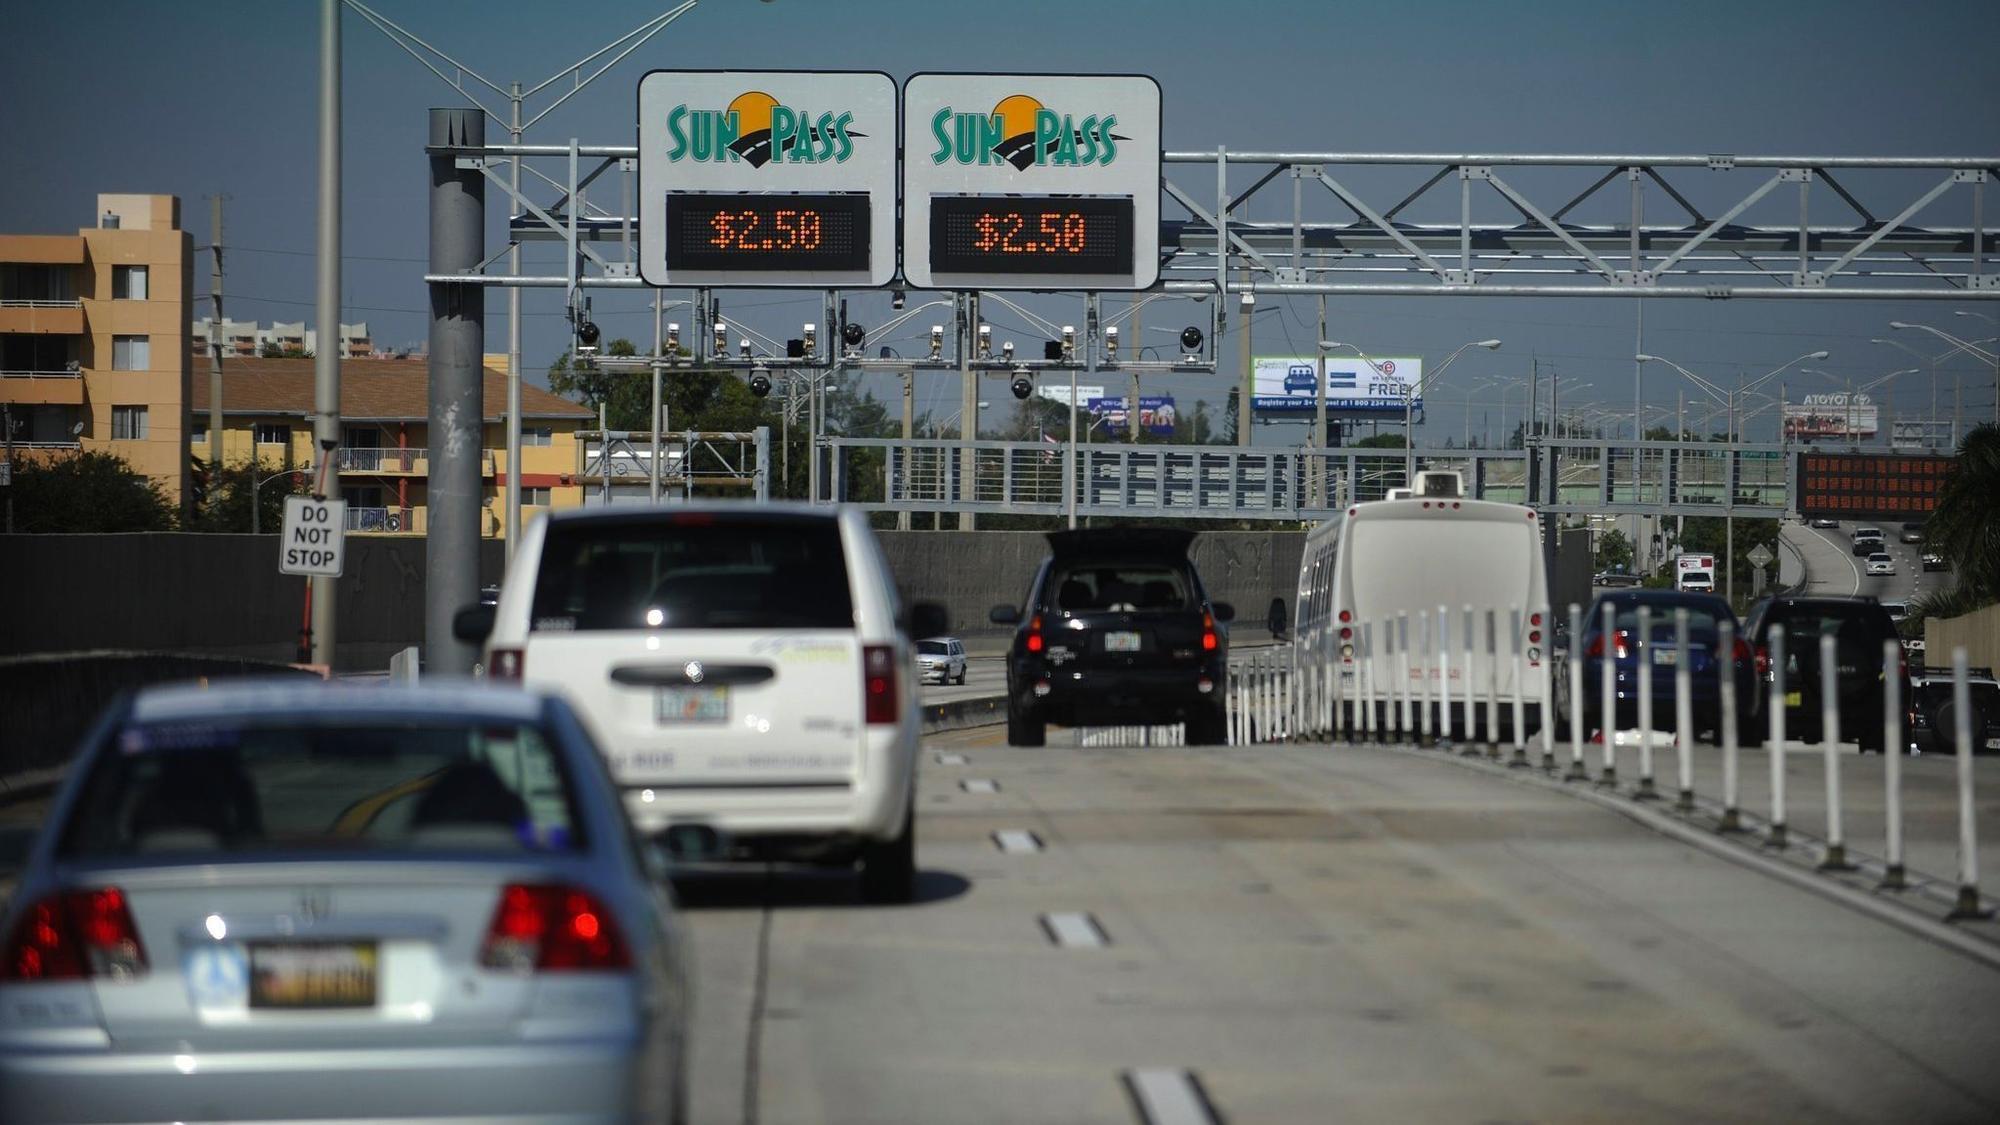 make-sunpass-work-with-other-states-toll-systems-editorial-broward-us